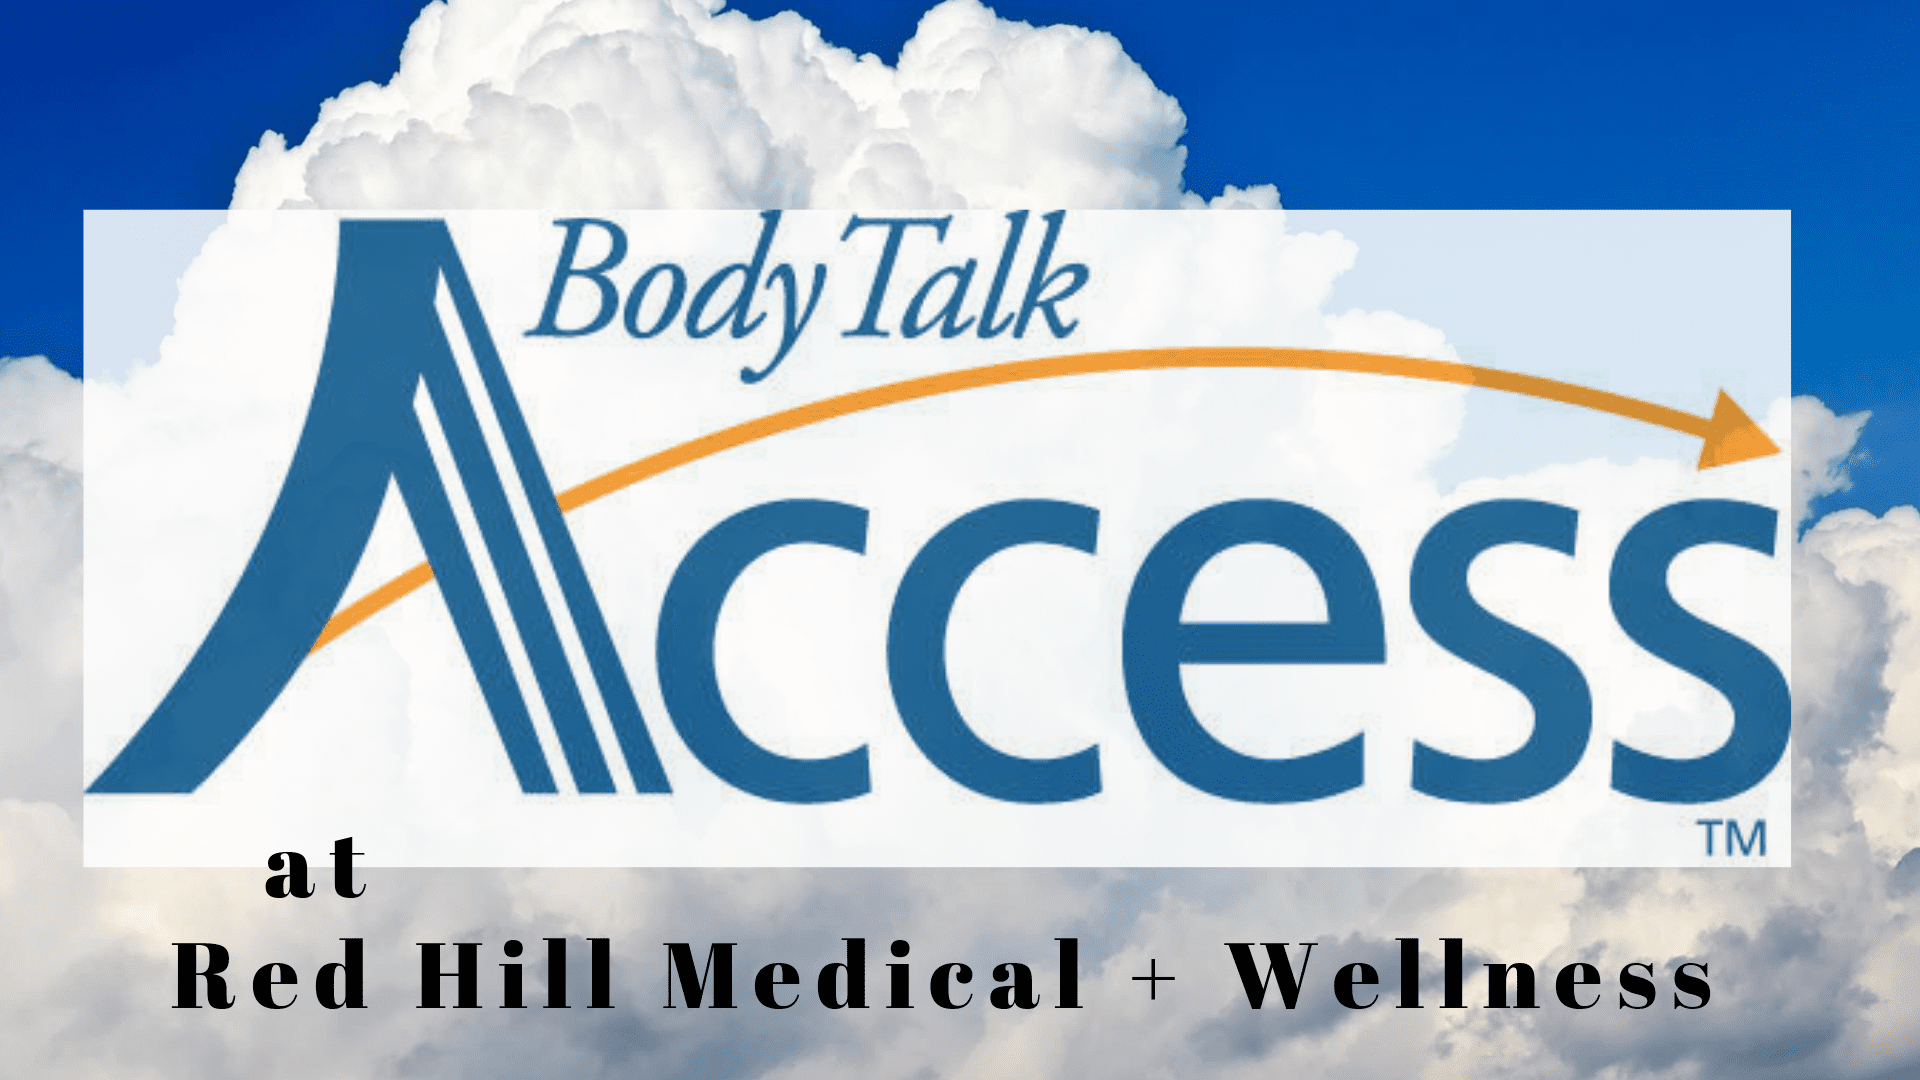 A sky filled with clouds and the words " body talk access."